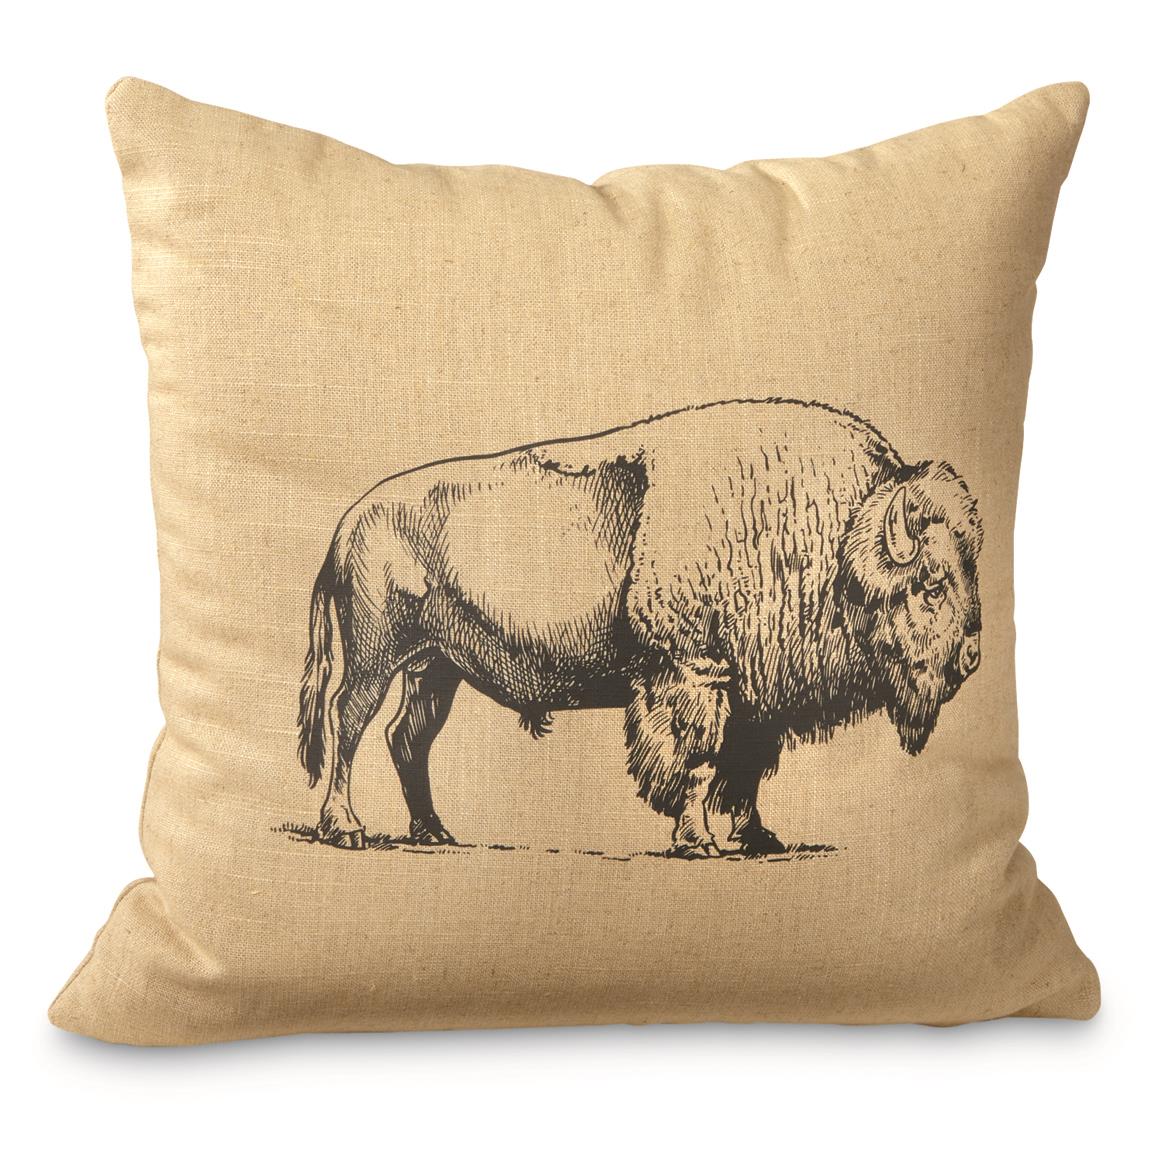 Wooded River Buffalo Decorative Pillow, Linen Straw